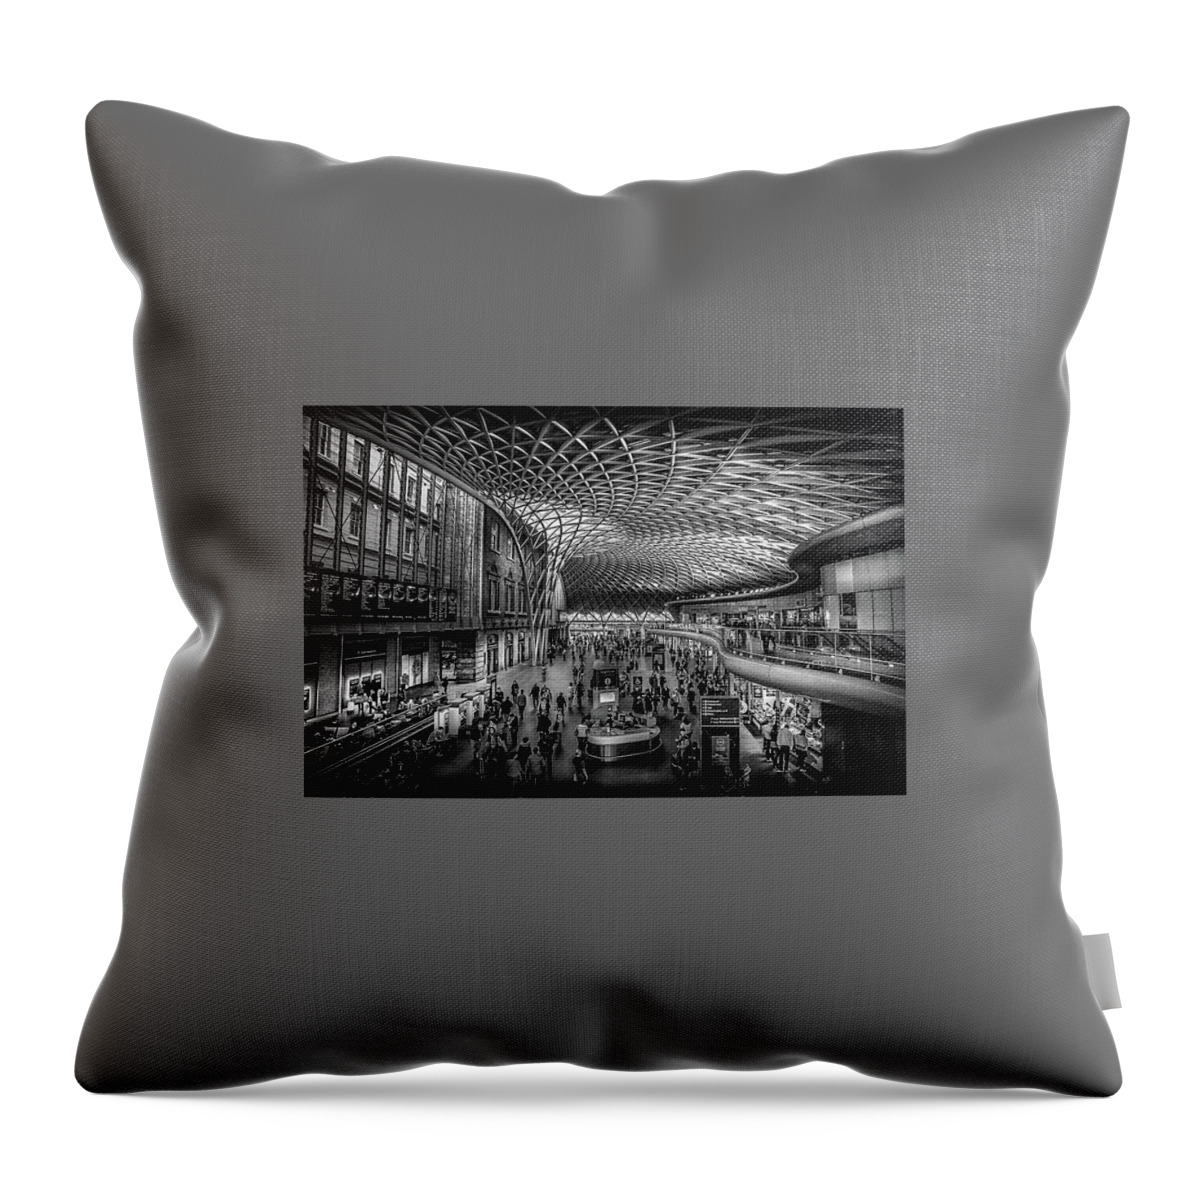 Black And White Throw Pillow featuring the photograph Station by S J Bryant